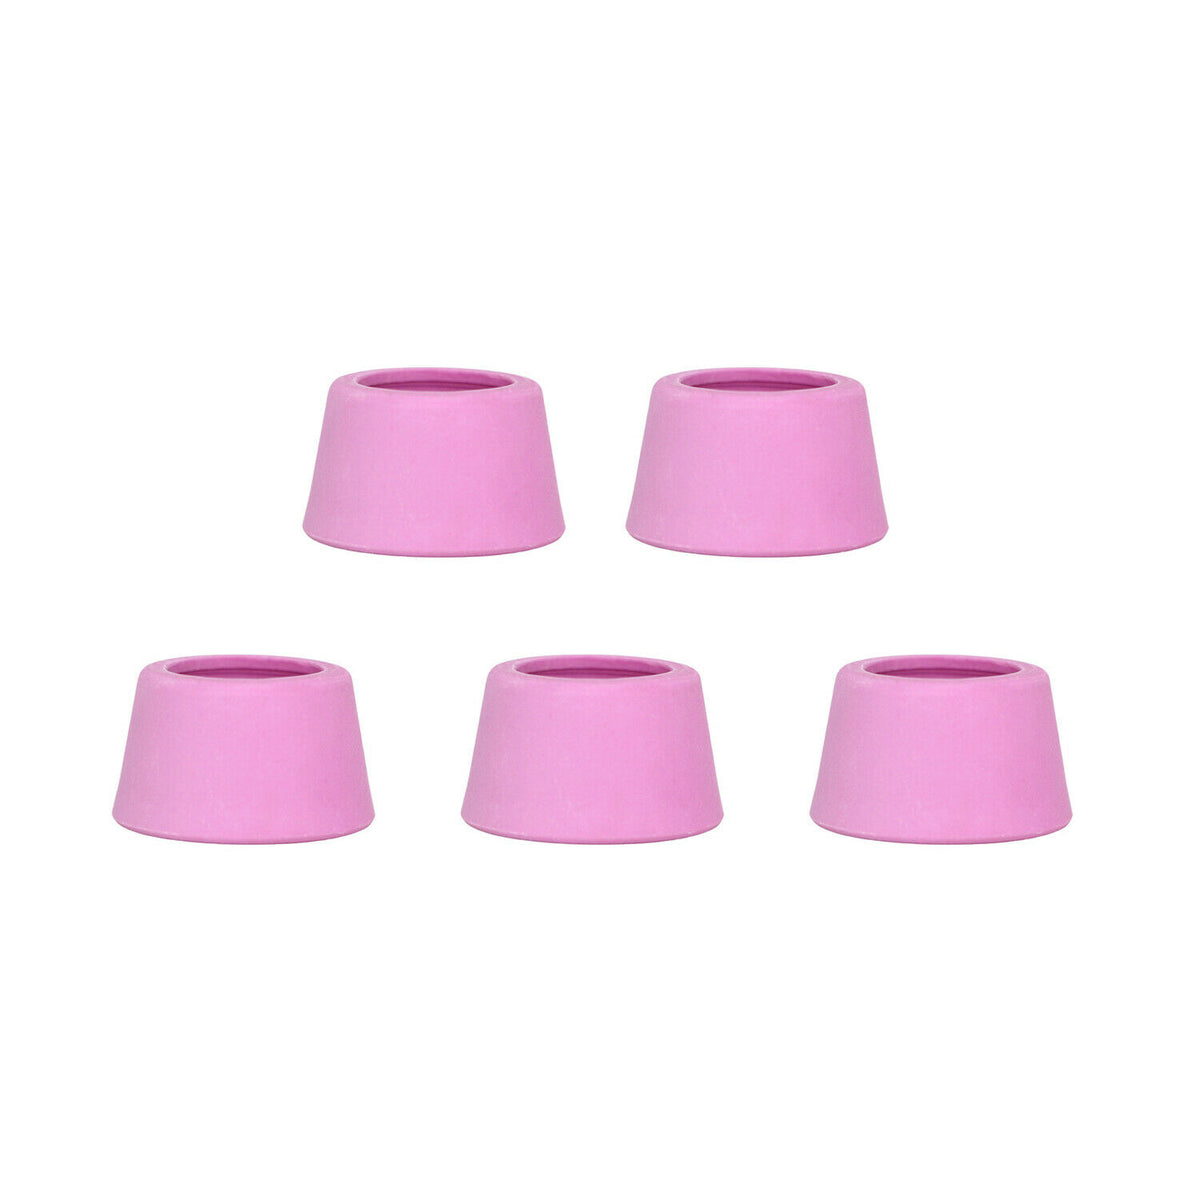 5-pk Shield Cups Grooved